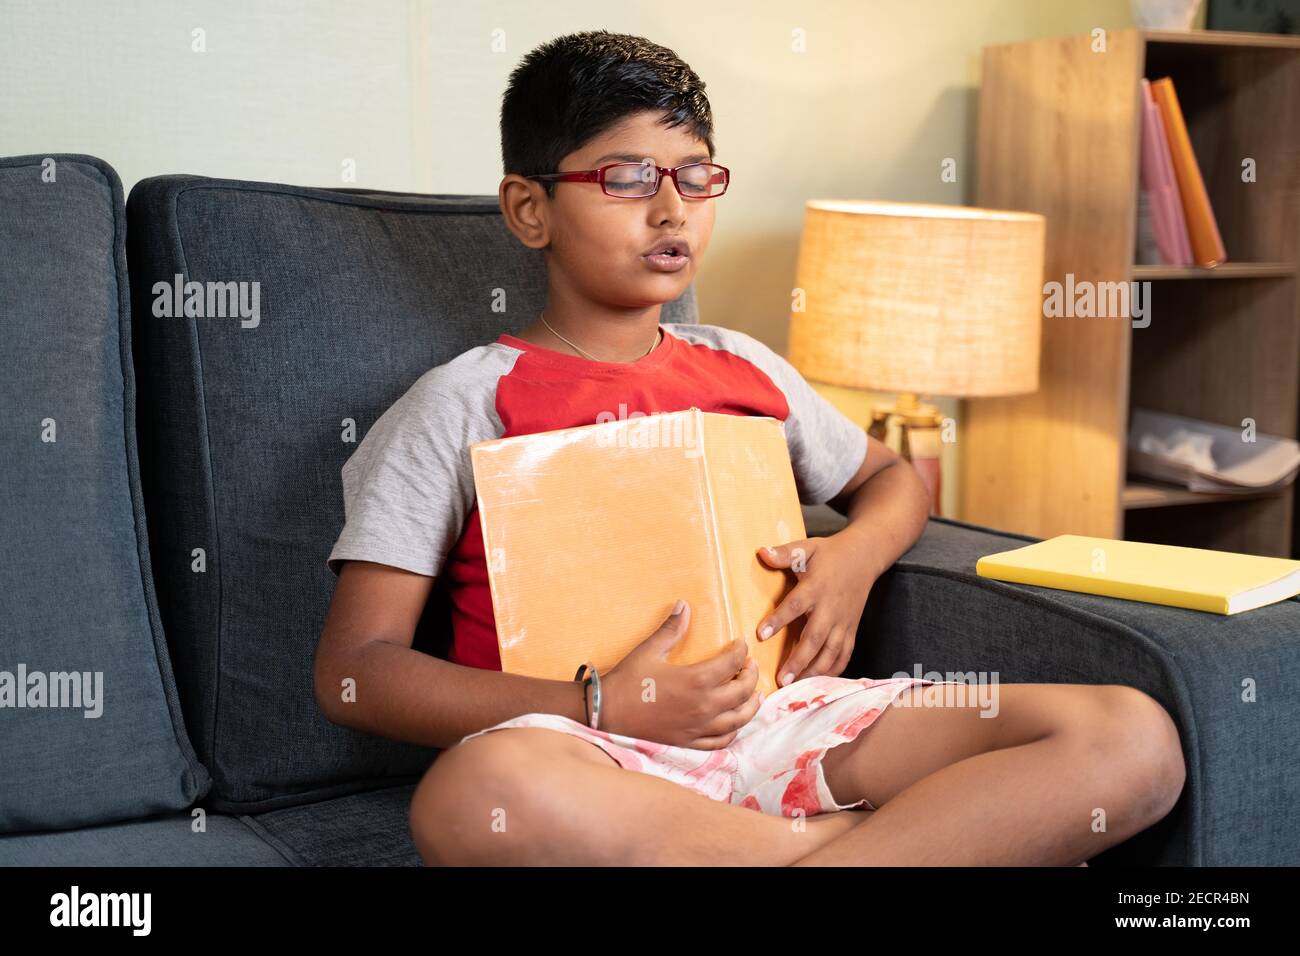 young kid mugging up answers from book during exams with out understanding the concepts at home on sofa - concept of education system and teenager Stock Photo